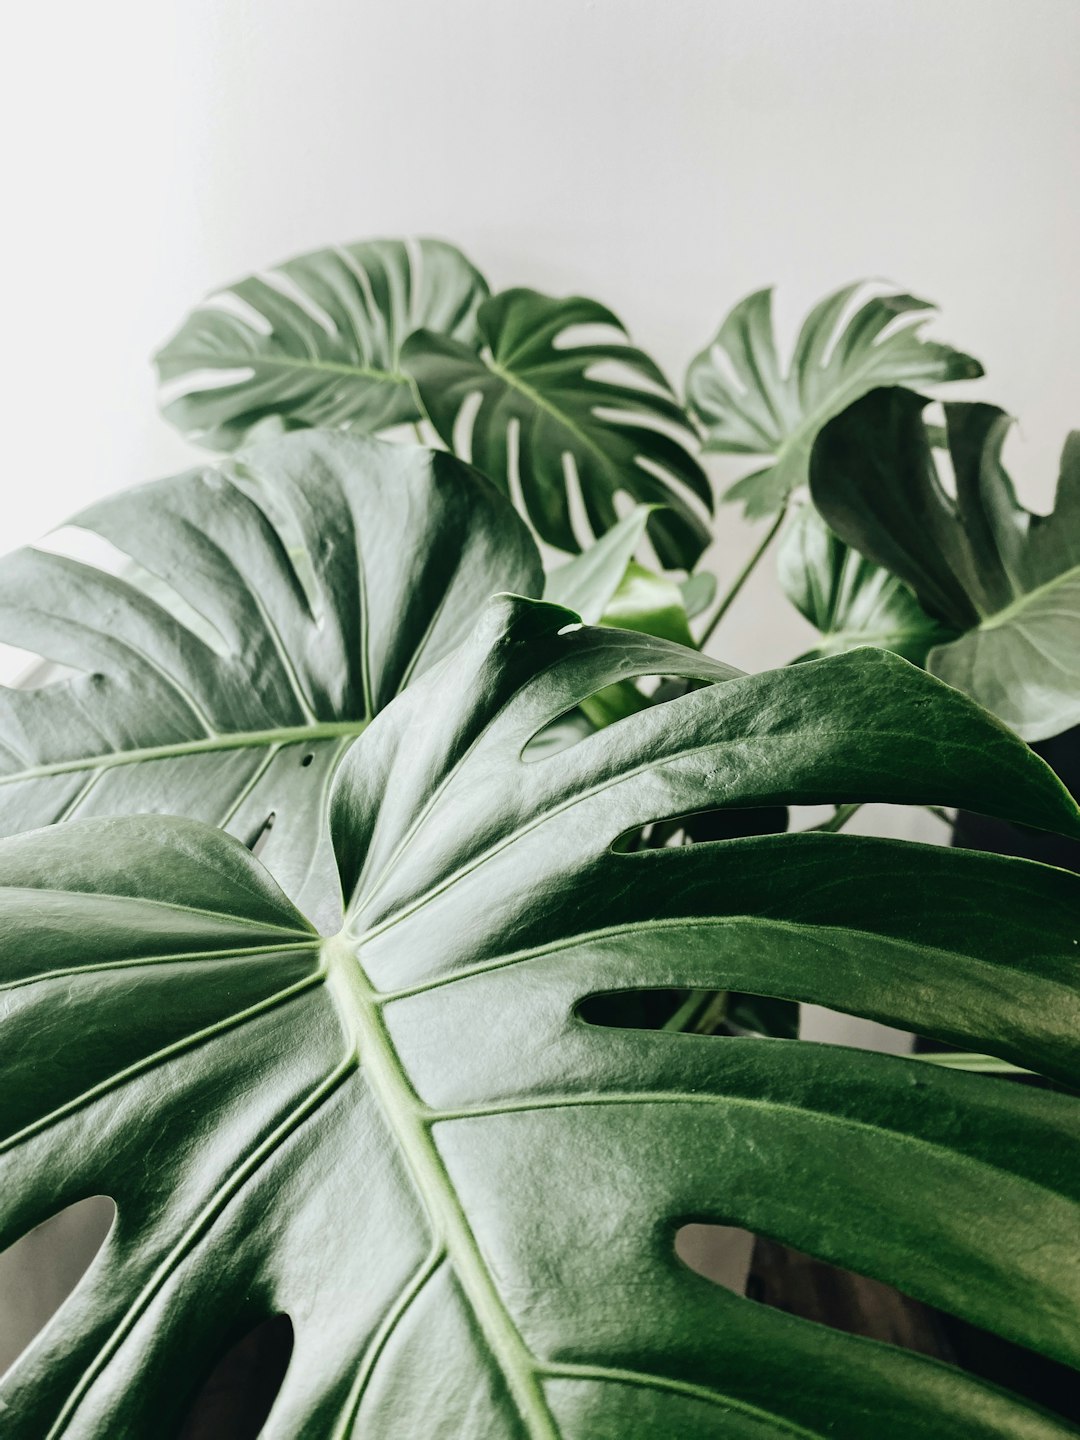 Repotting Houseplants: When and How to Do It